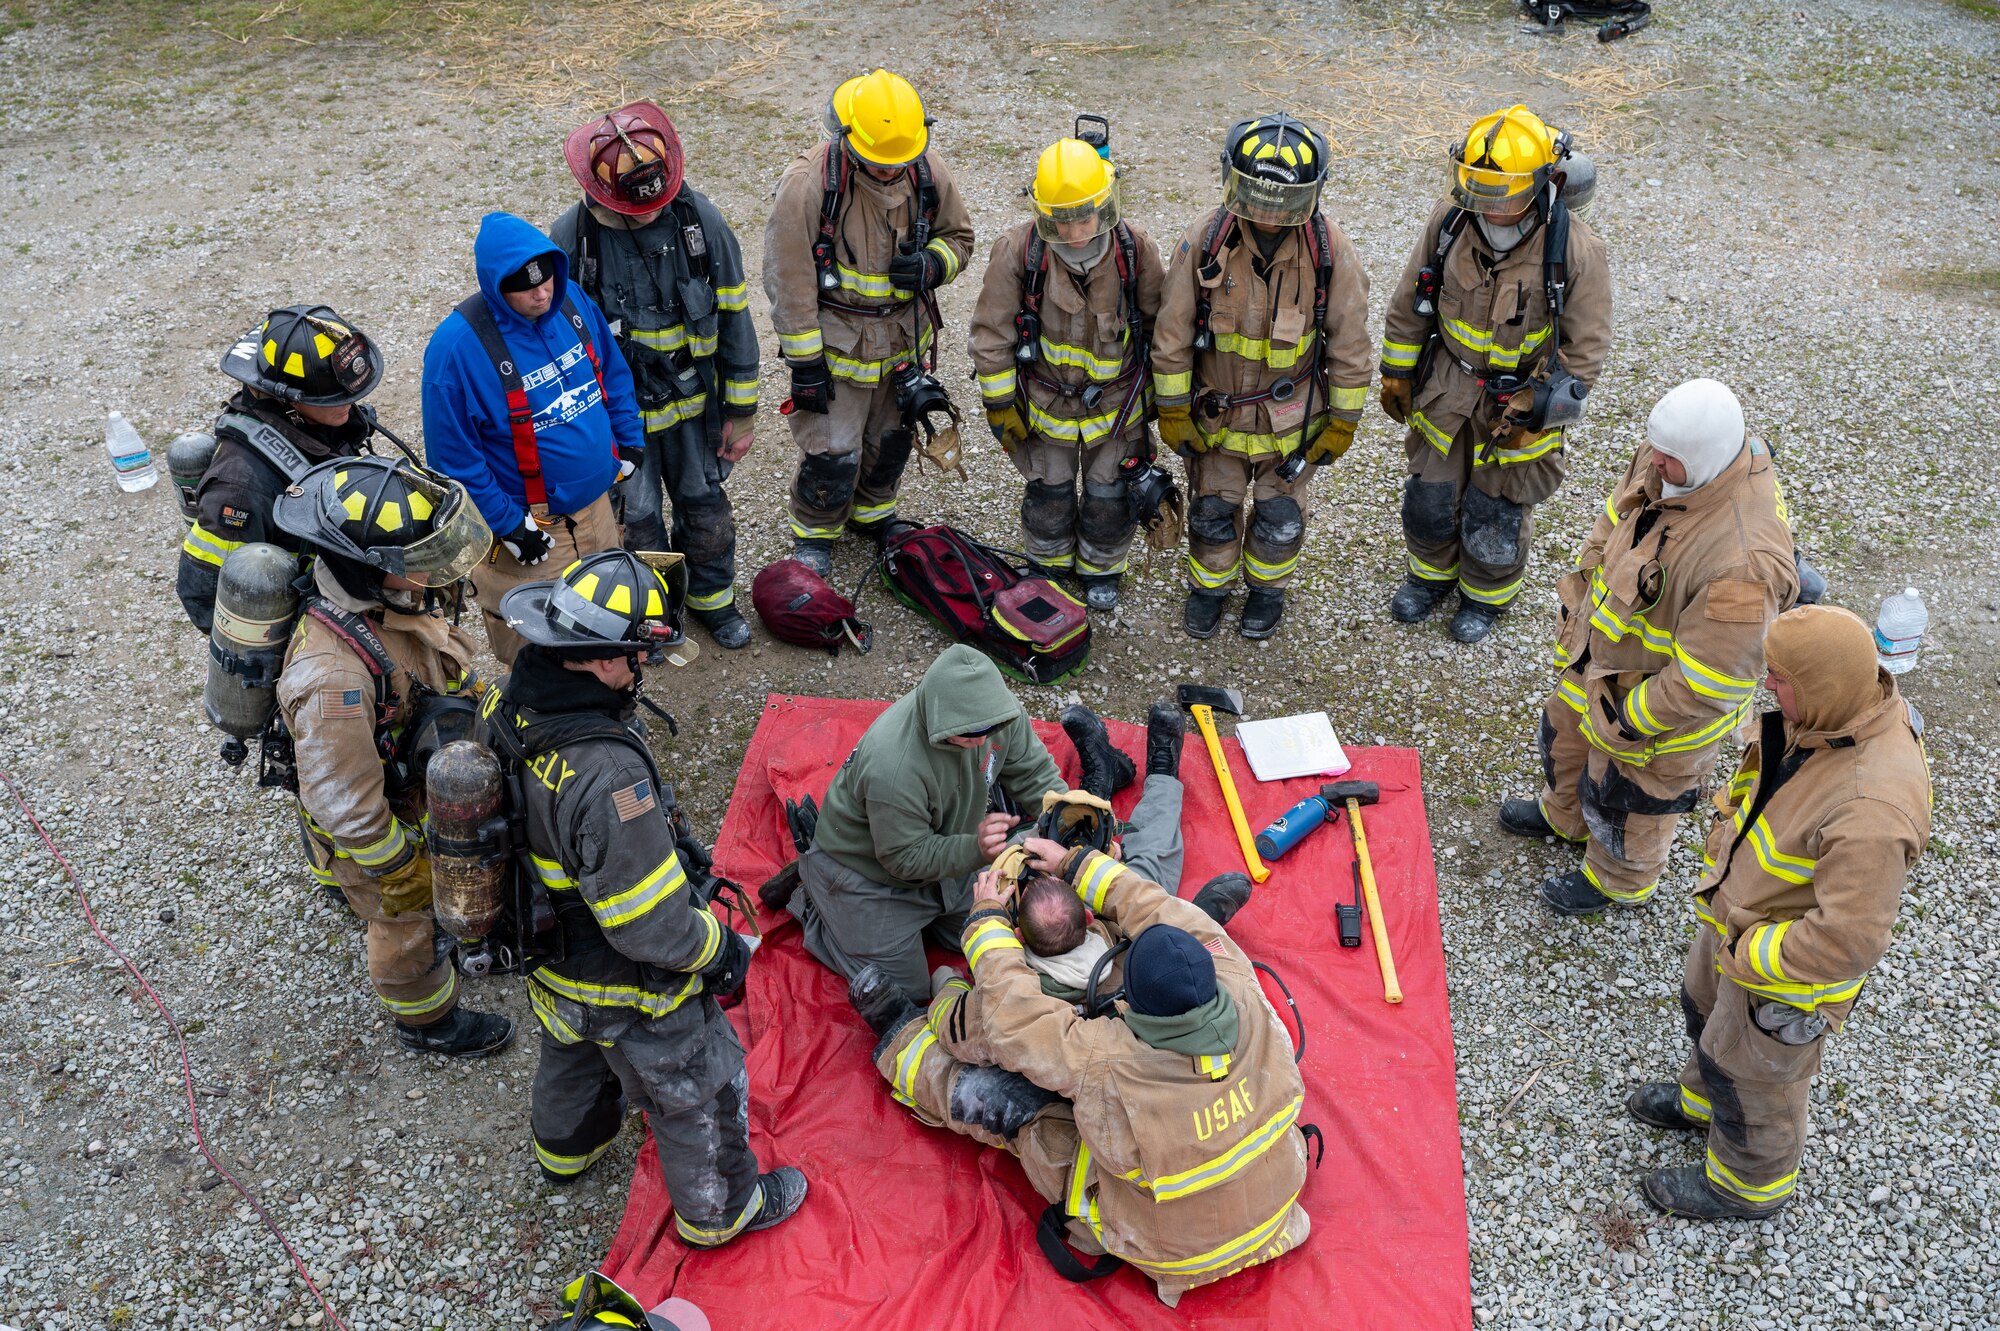 An aerial shot of a group of firefighters standing in a circle, looking down at a gear demonstration by other firefighters on the ground.